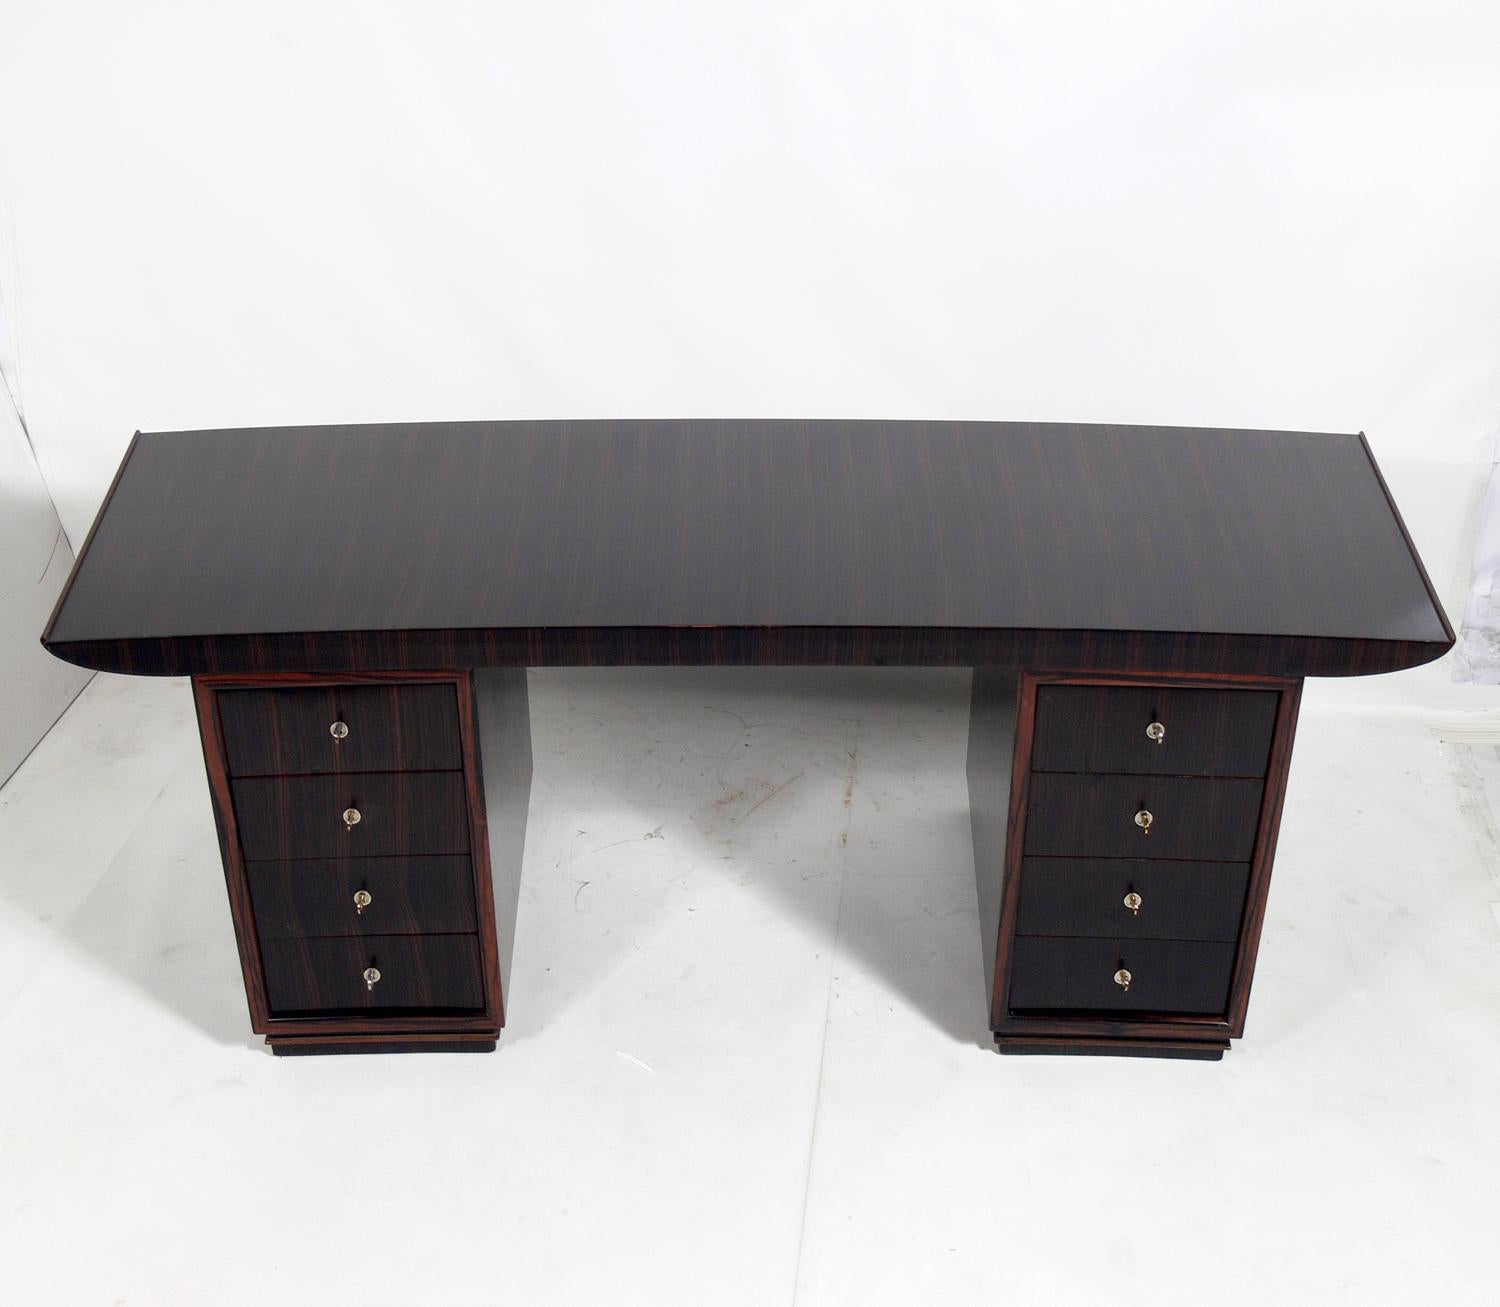 French Art Deco Macassar desk or bureau plat by Dominique, unsigned, France, circa late 1920s-1930s. Beautiful figured graining to the macassar ebony. Recently refinished and ready to use.